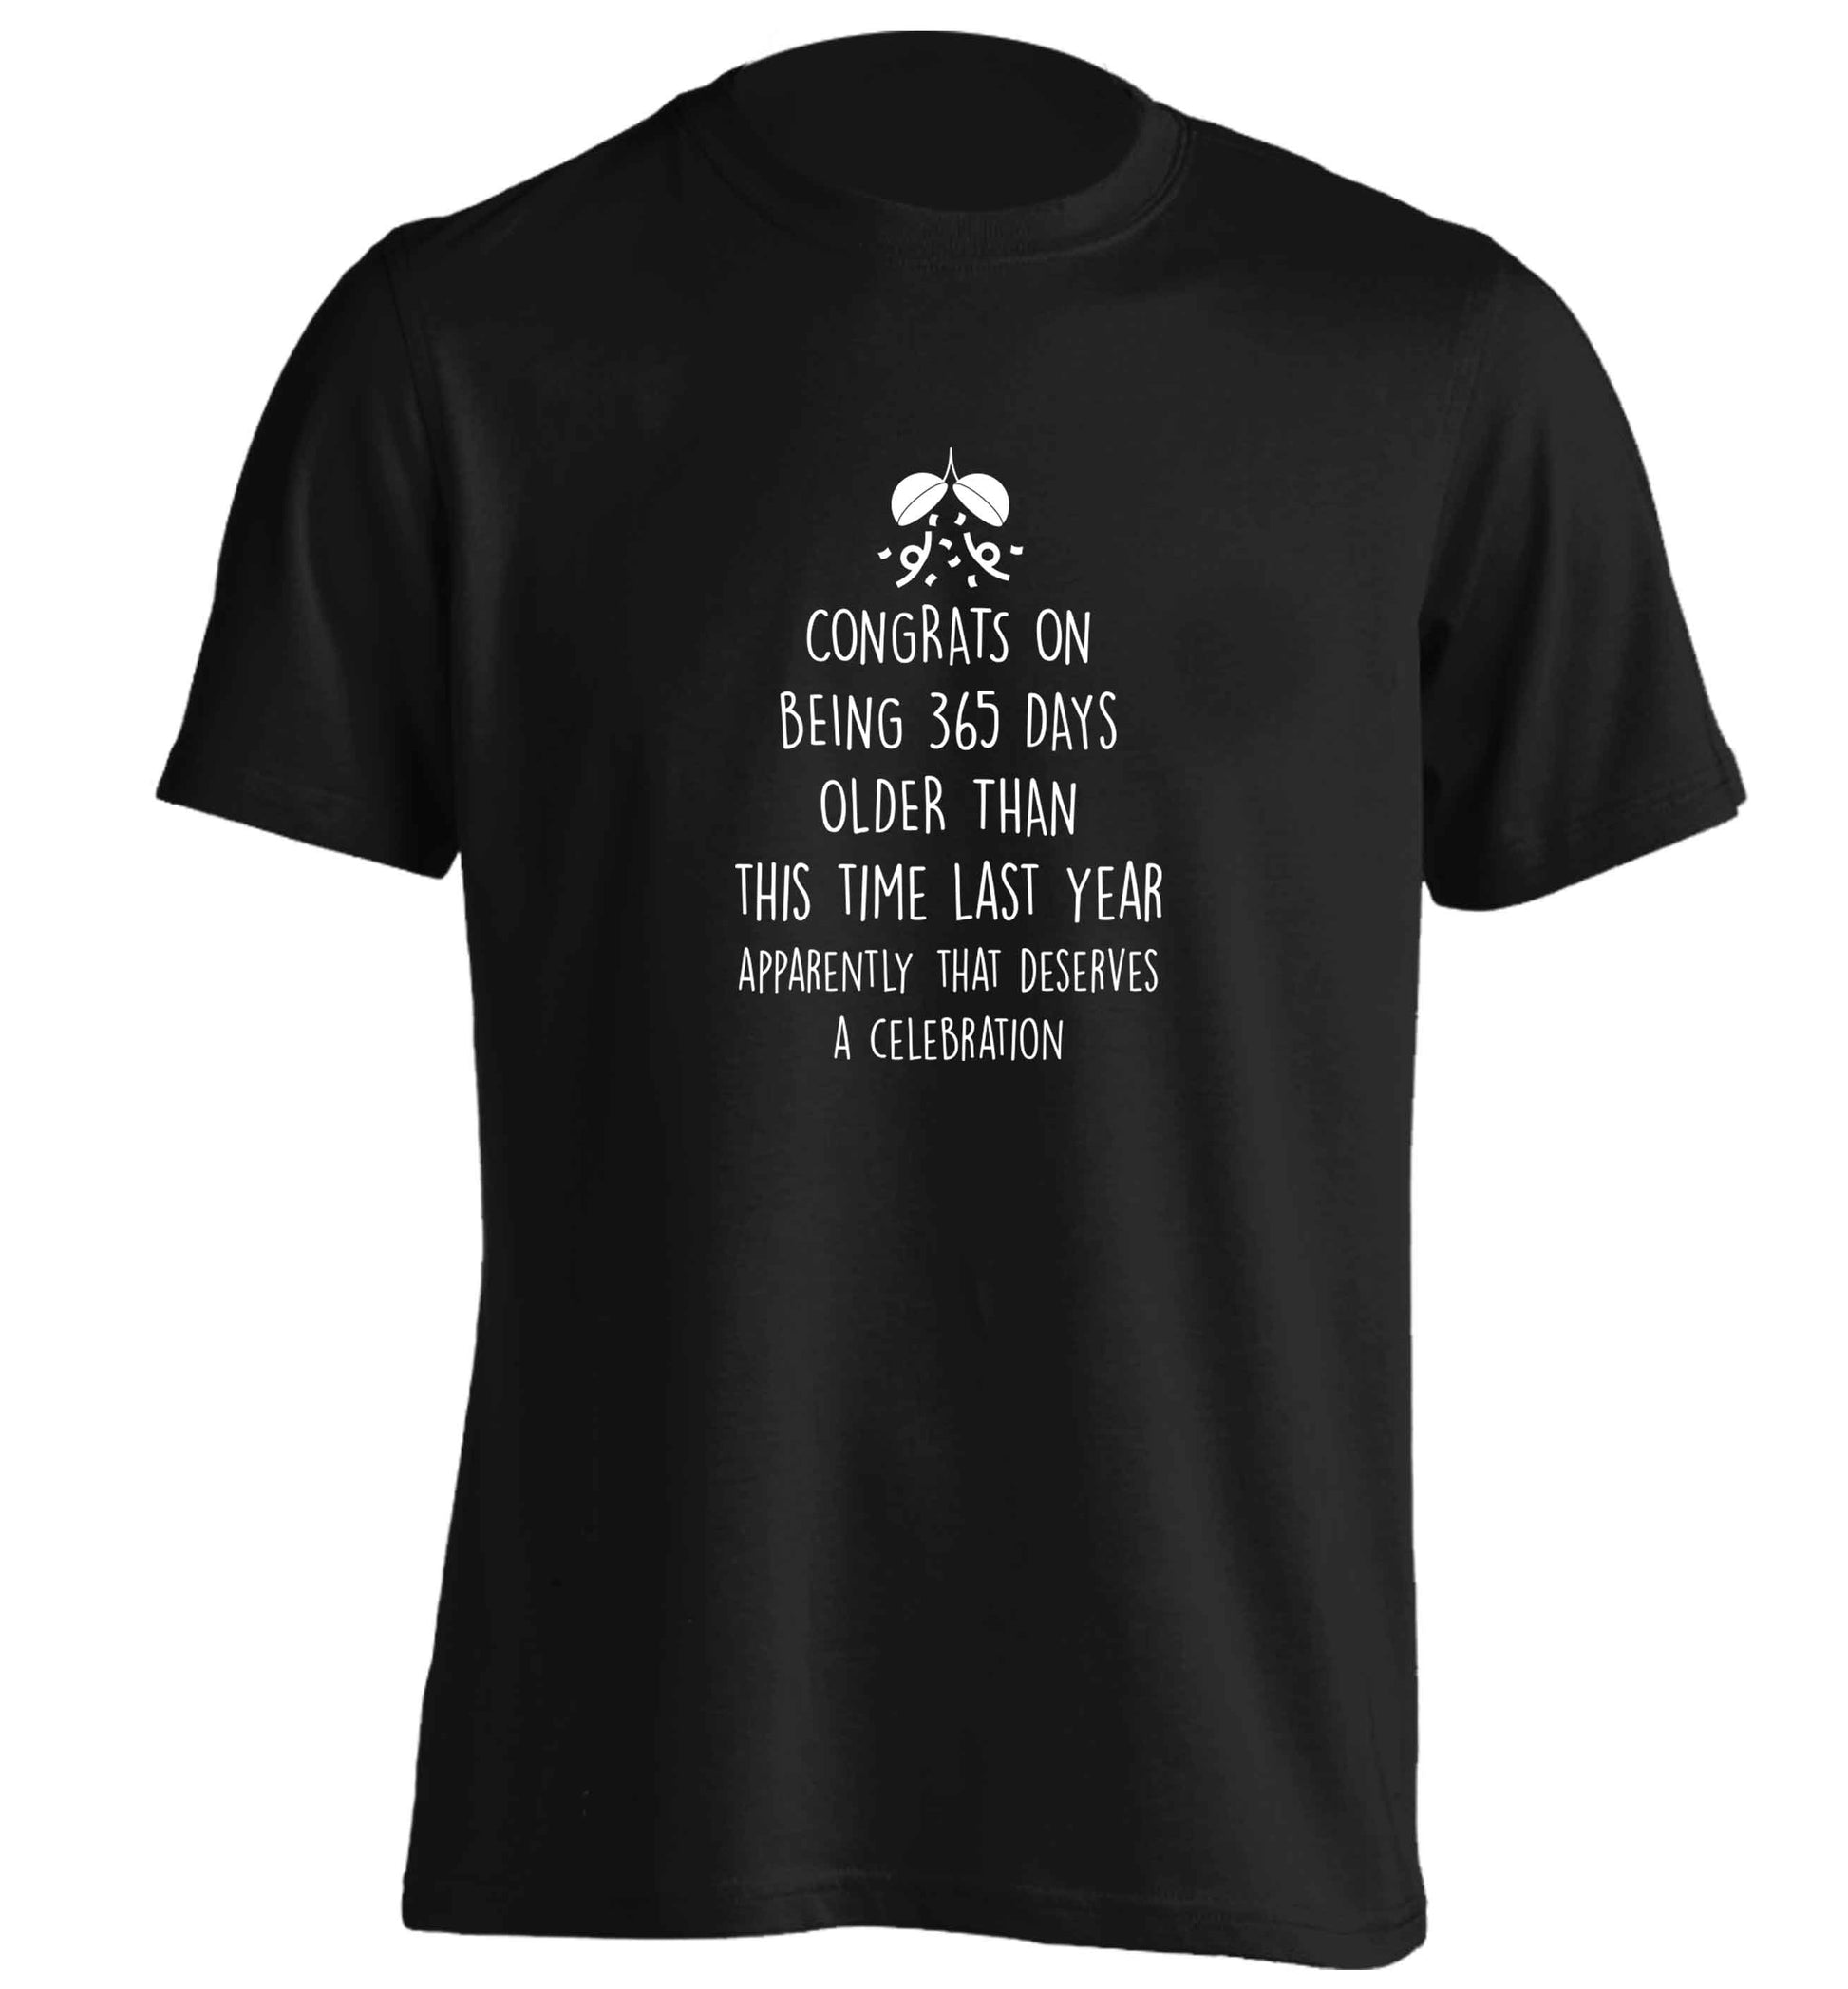 Congrats on being 365 days older than you were this time last year apparently that deserves a celebration adults unisex black Tshirt 2XL